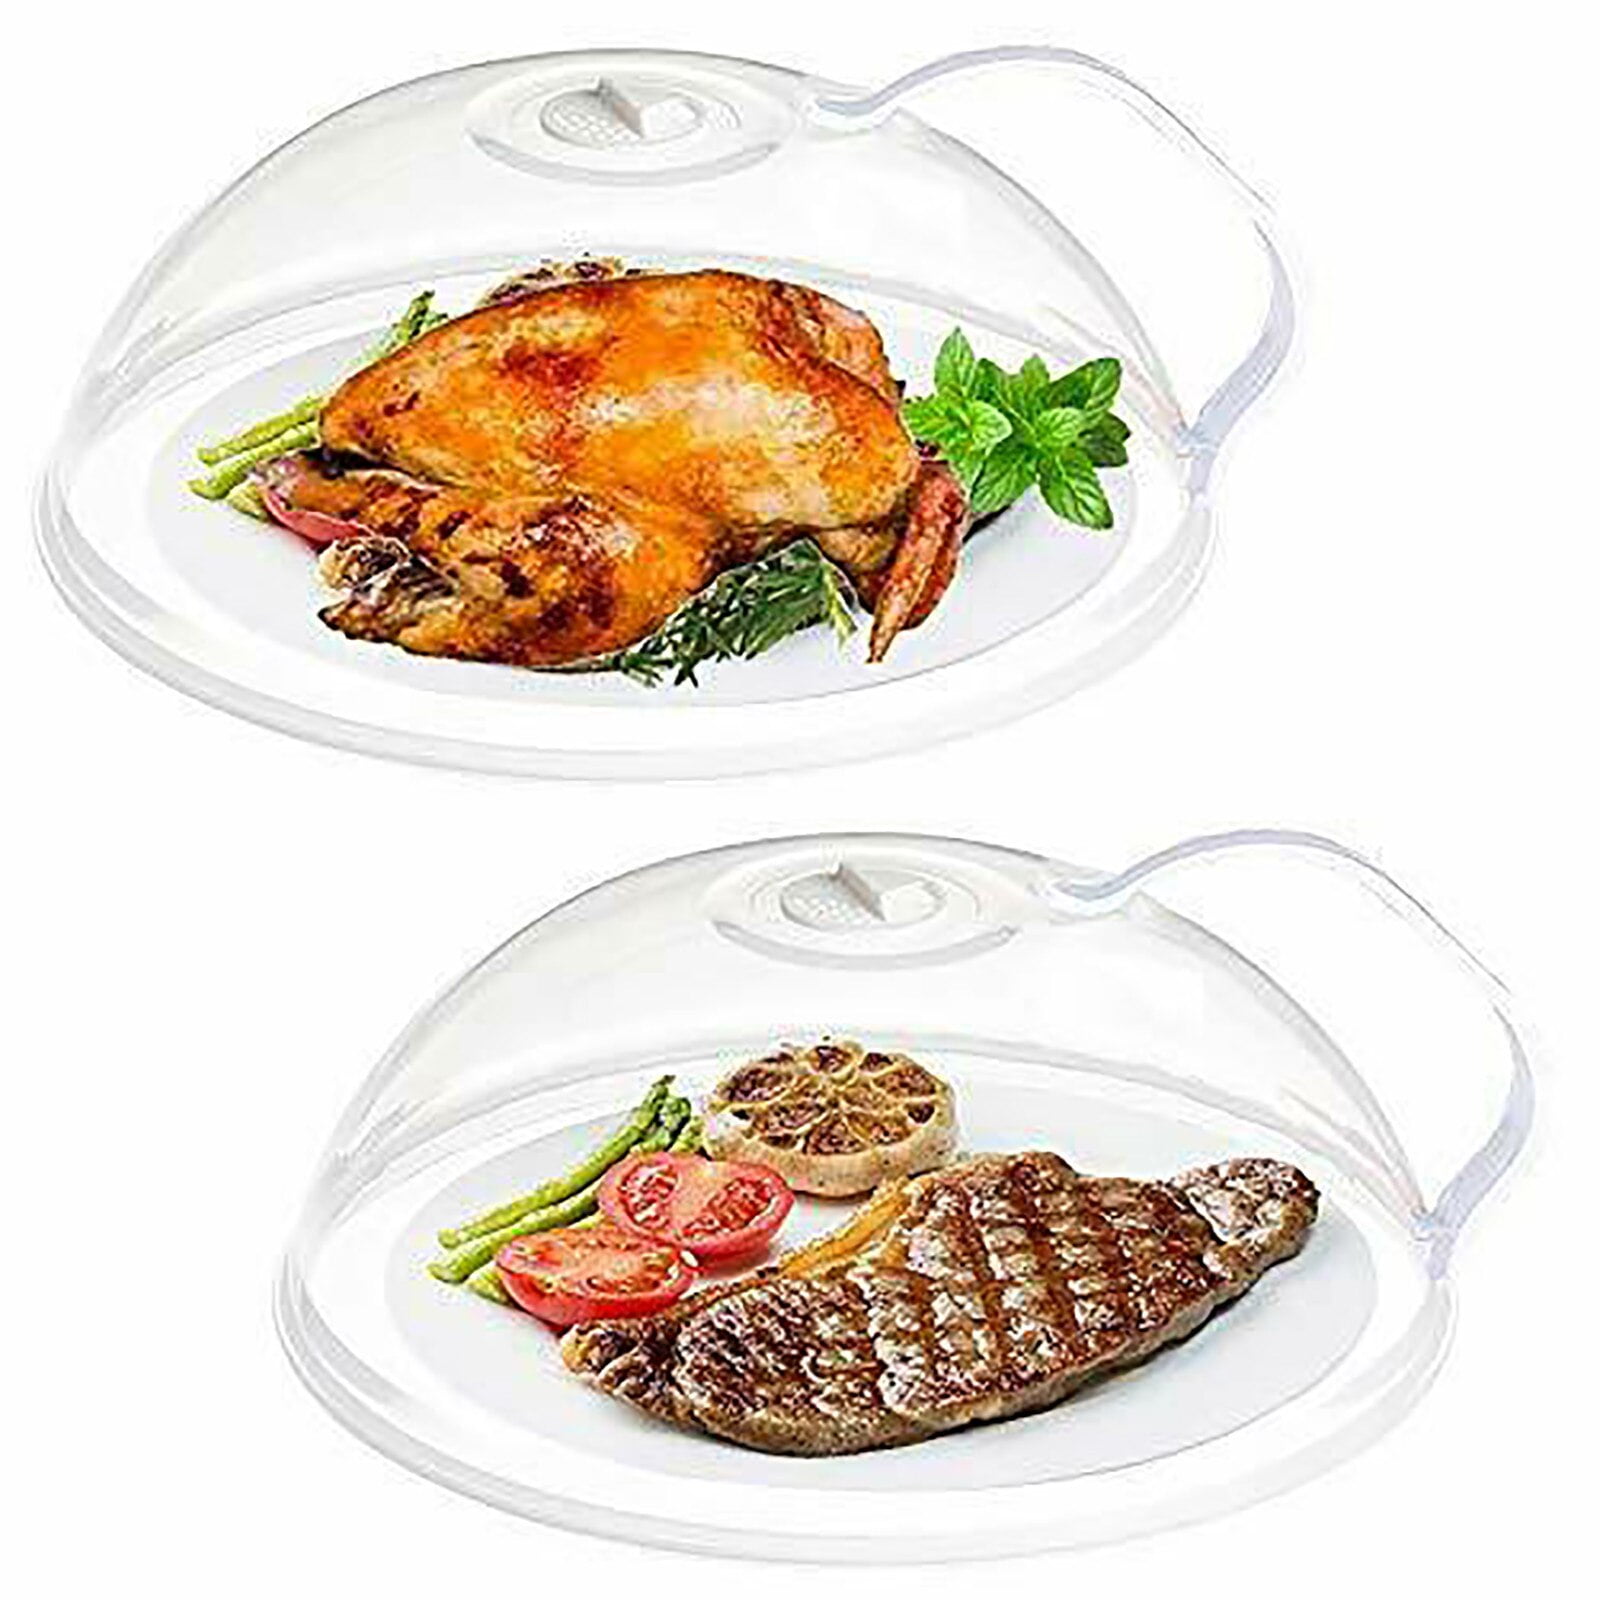  Microwave Splatter Cover, Microwave Cover for Foods BPA-Free,  Microwave Plate Cover Guard Lid with Handle, Hanging Hole and Adjustable  Steam Vents Microwave Oven Cleaner Large-2 PACK: Home & Kitchen